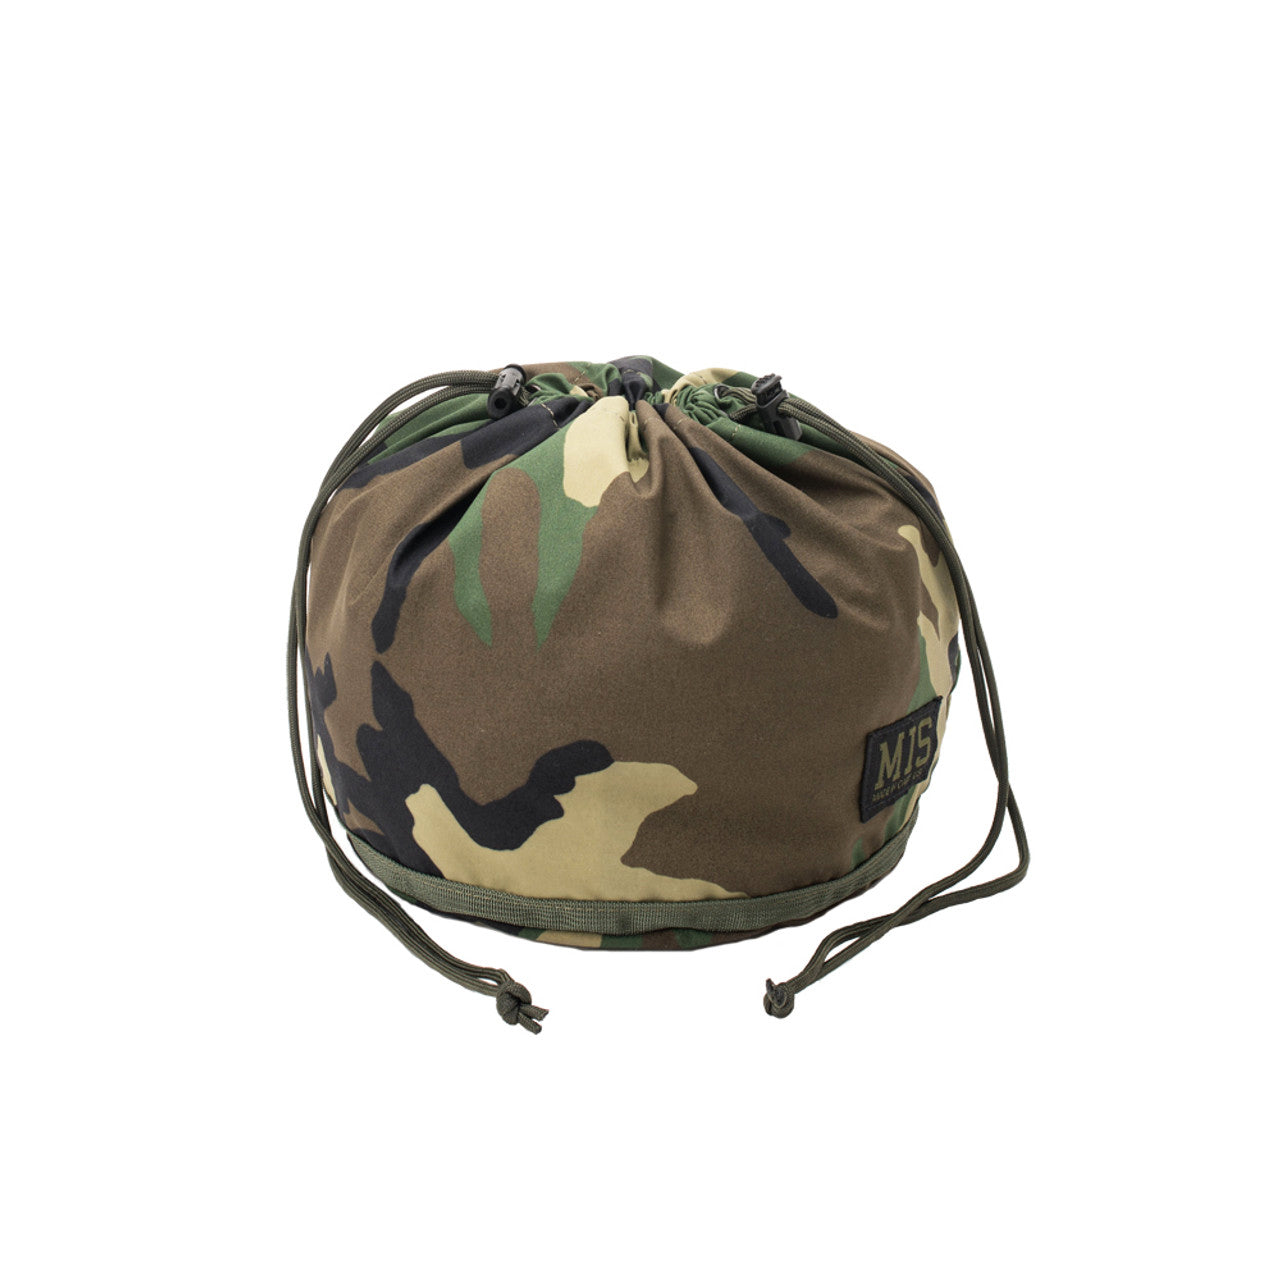 Personal Effects Bag - Woodland Camo : Compressed